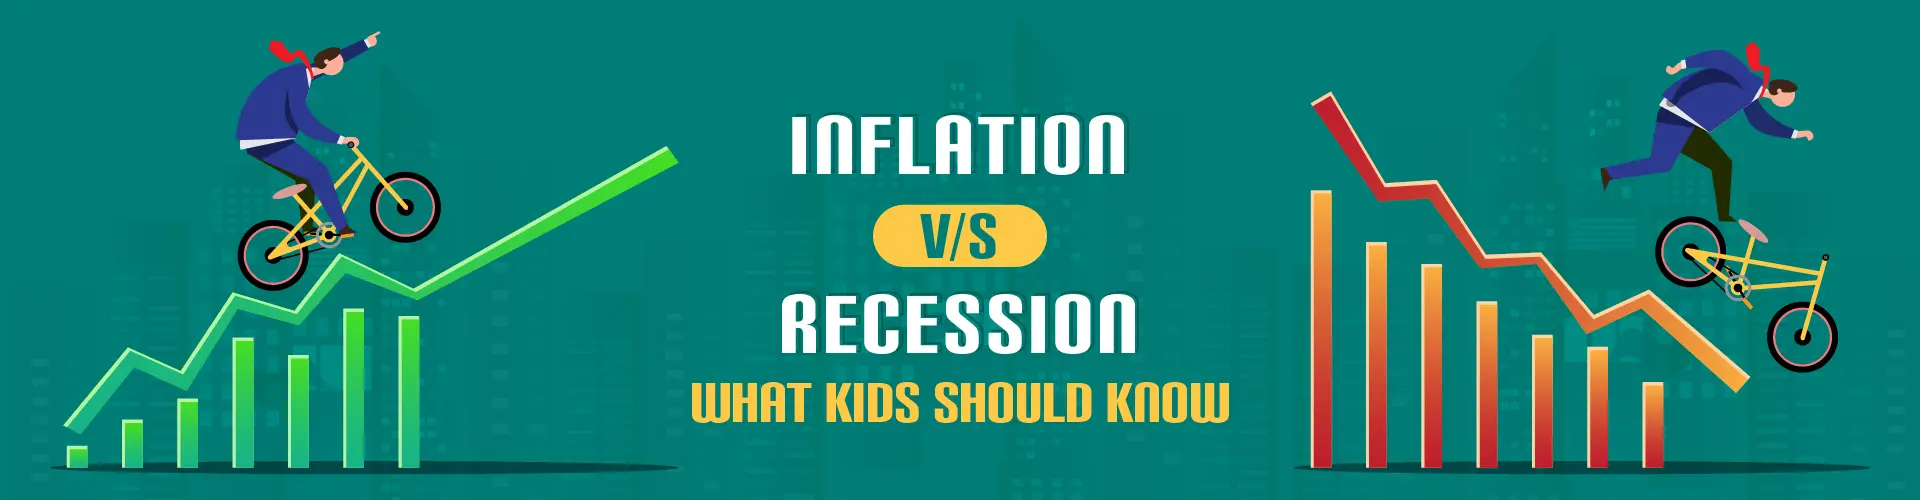 inflation vs recession